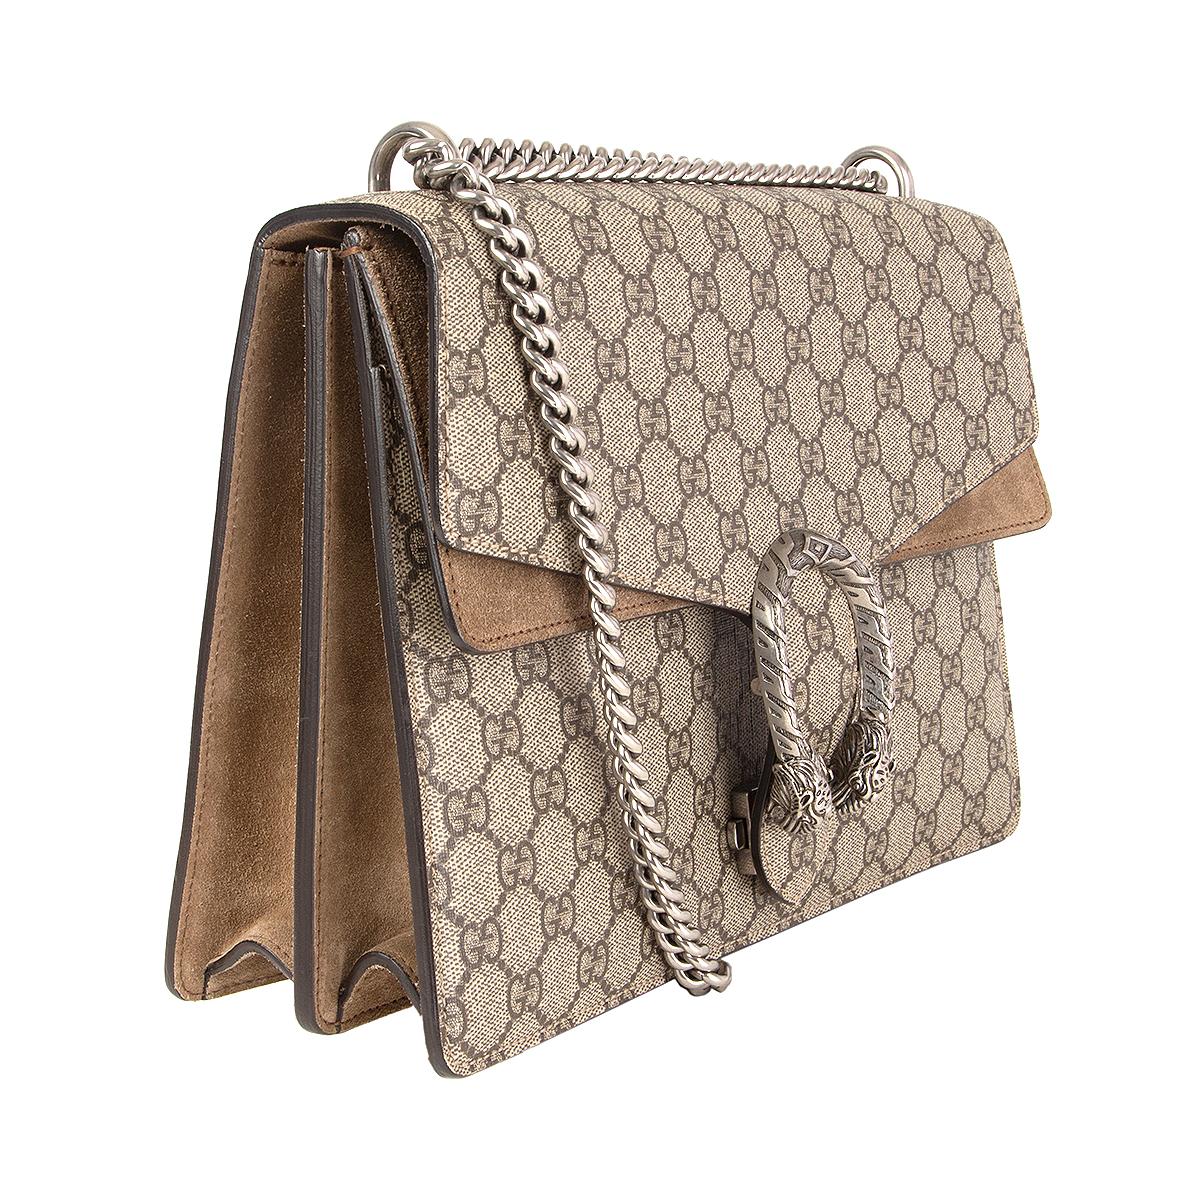 Gucci 'Medium Dionysus' shoulder bag in taupe suede and GG Supreme canvas. Textured antique silver-tone tiger head closure-a unique detail referencing the Greek god Dionysus. Sliding chain strap can be worn multiple ways, changing between a shoulder